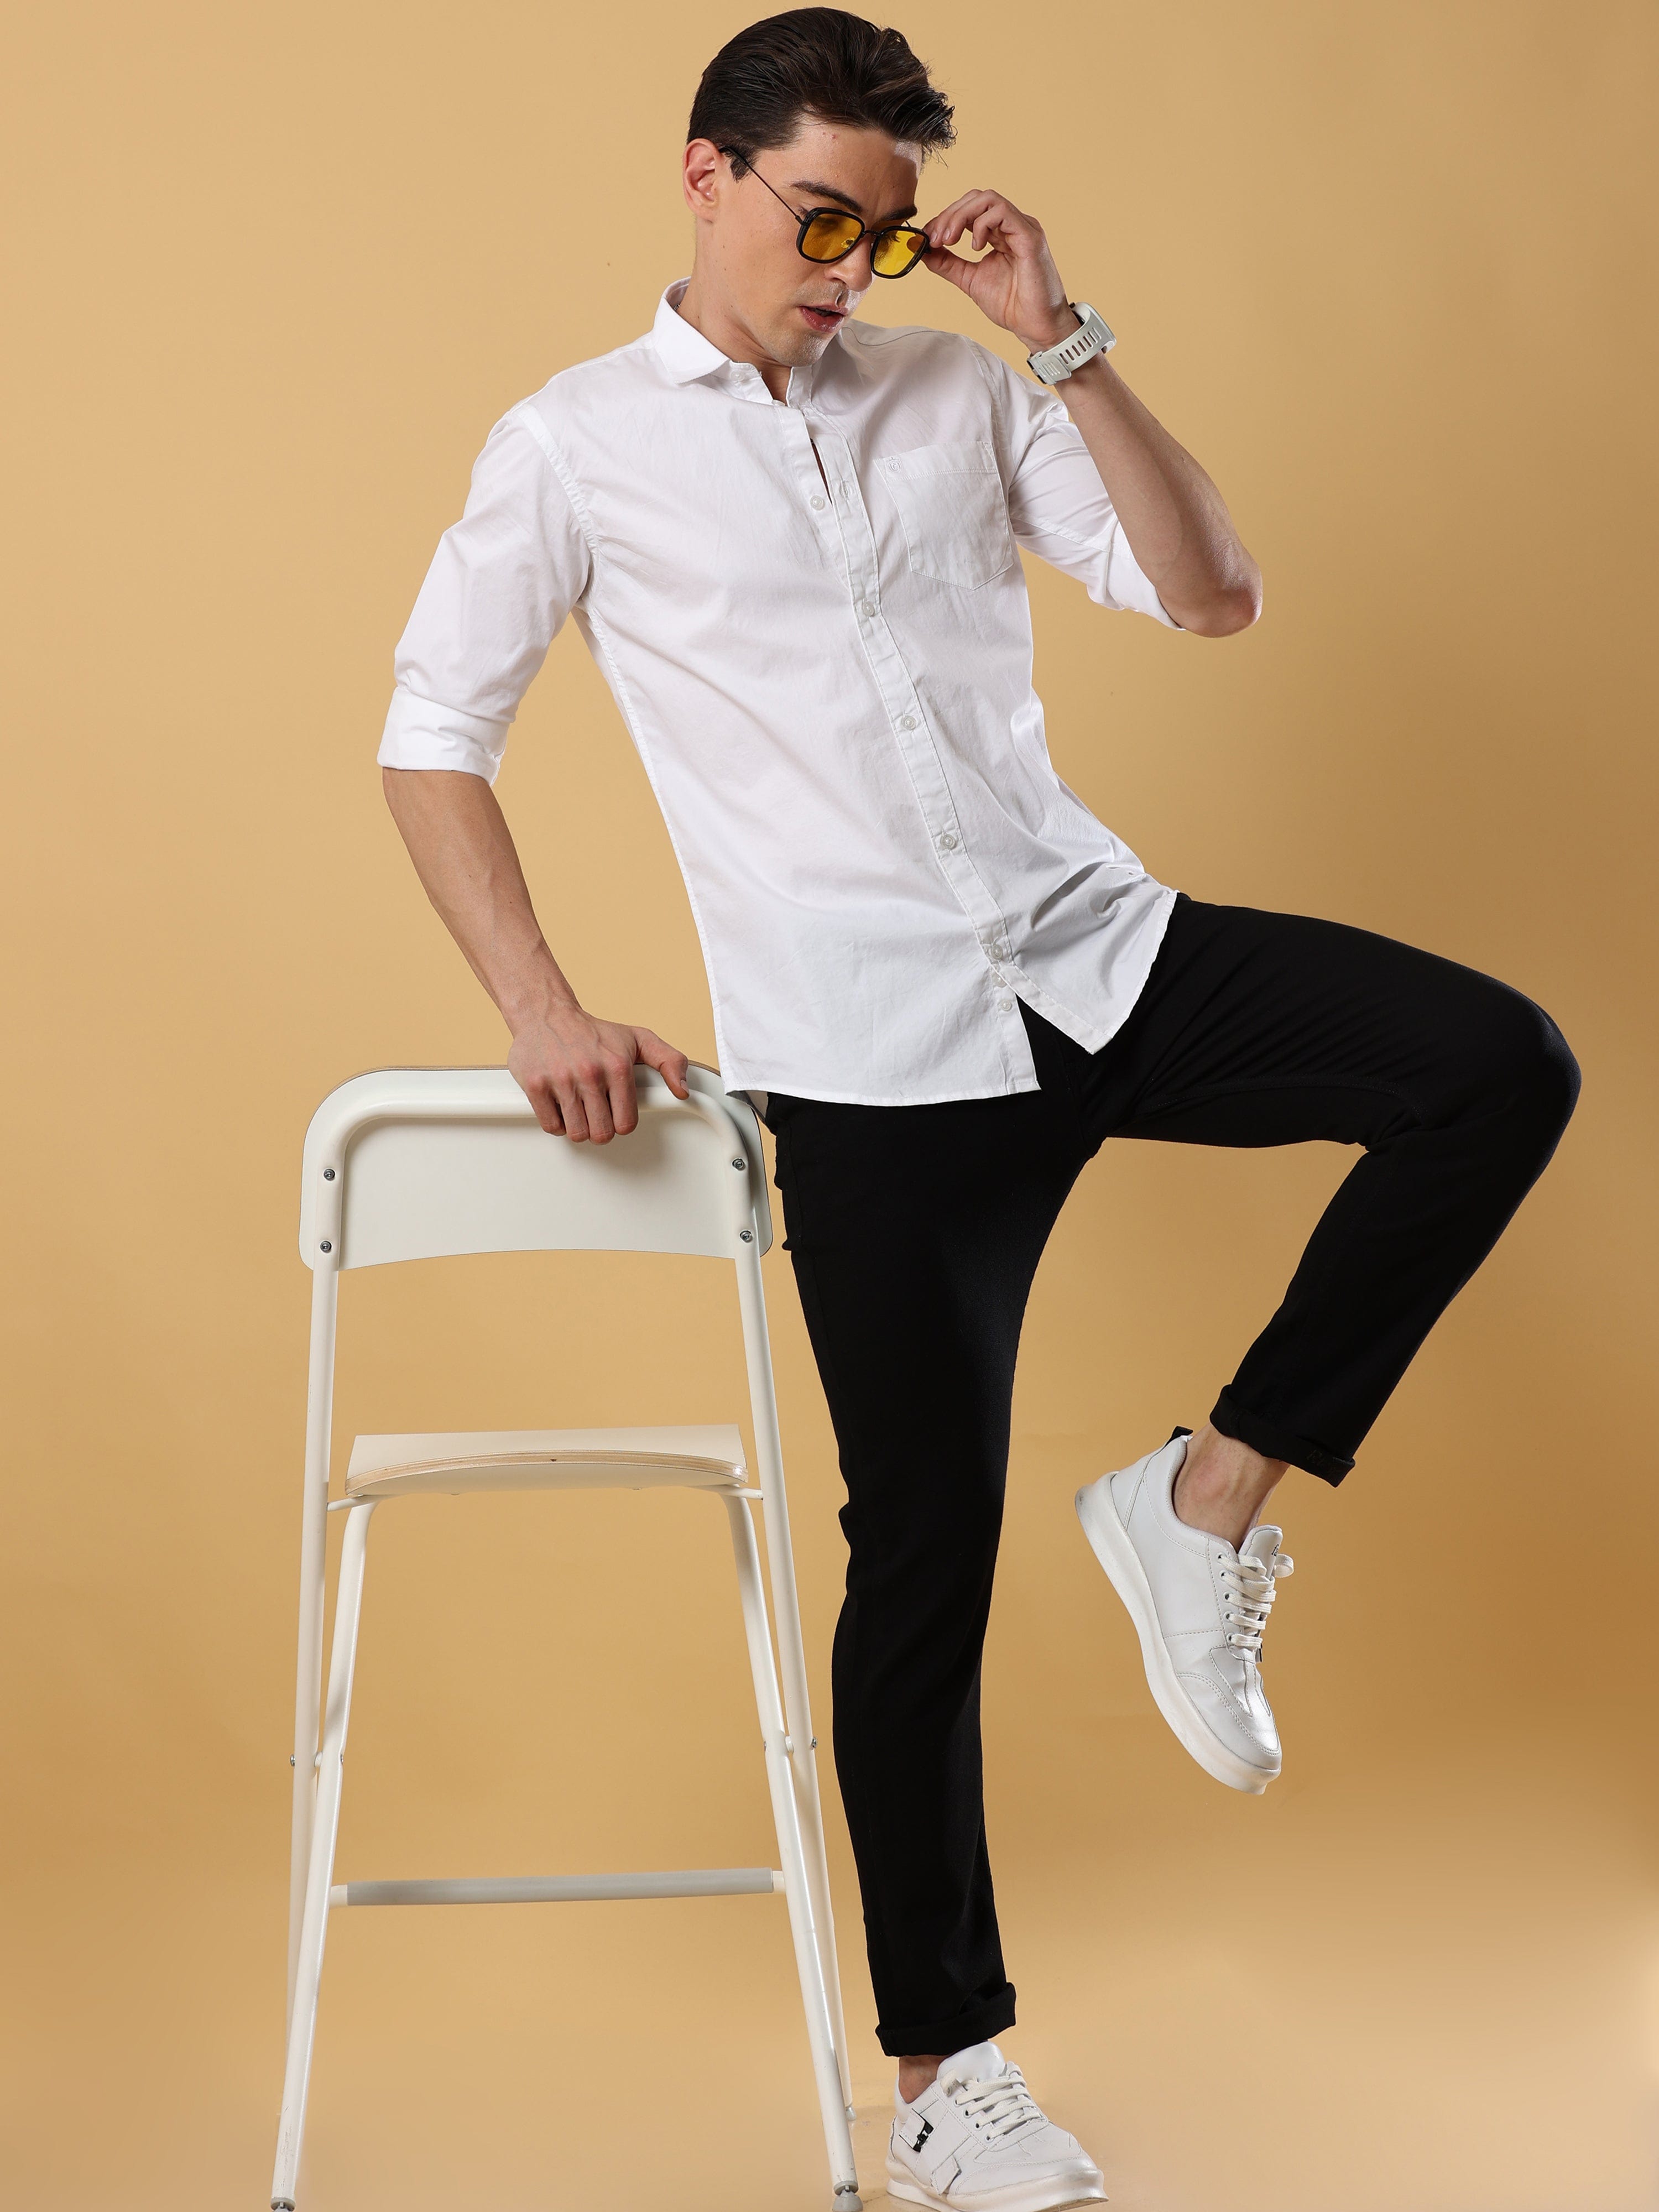 Shop Cool Poplin White Shirt Online At Great PriceRs. 799.00